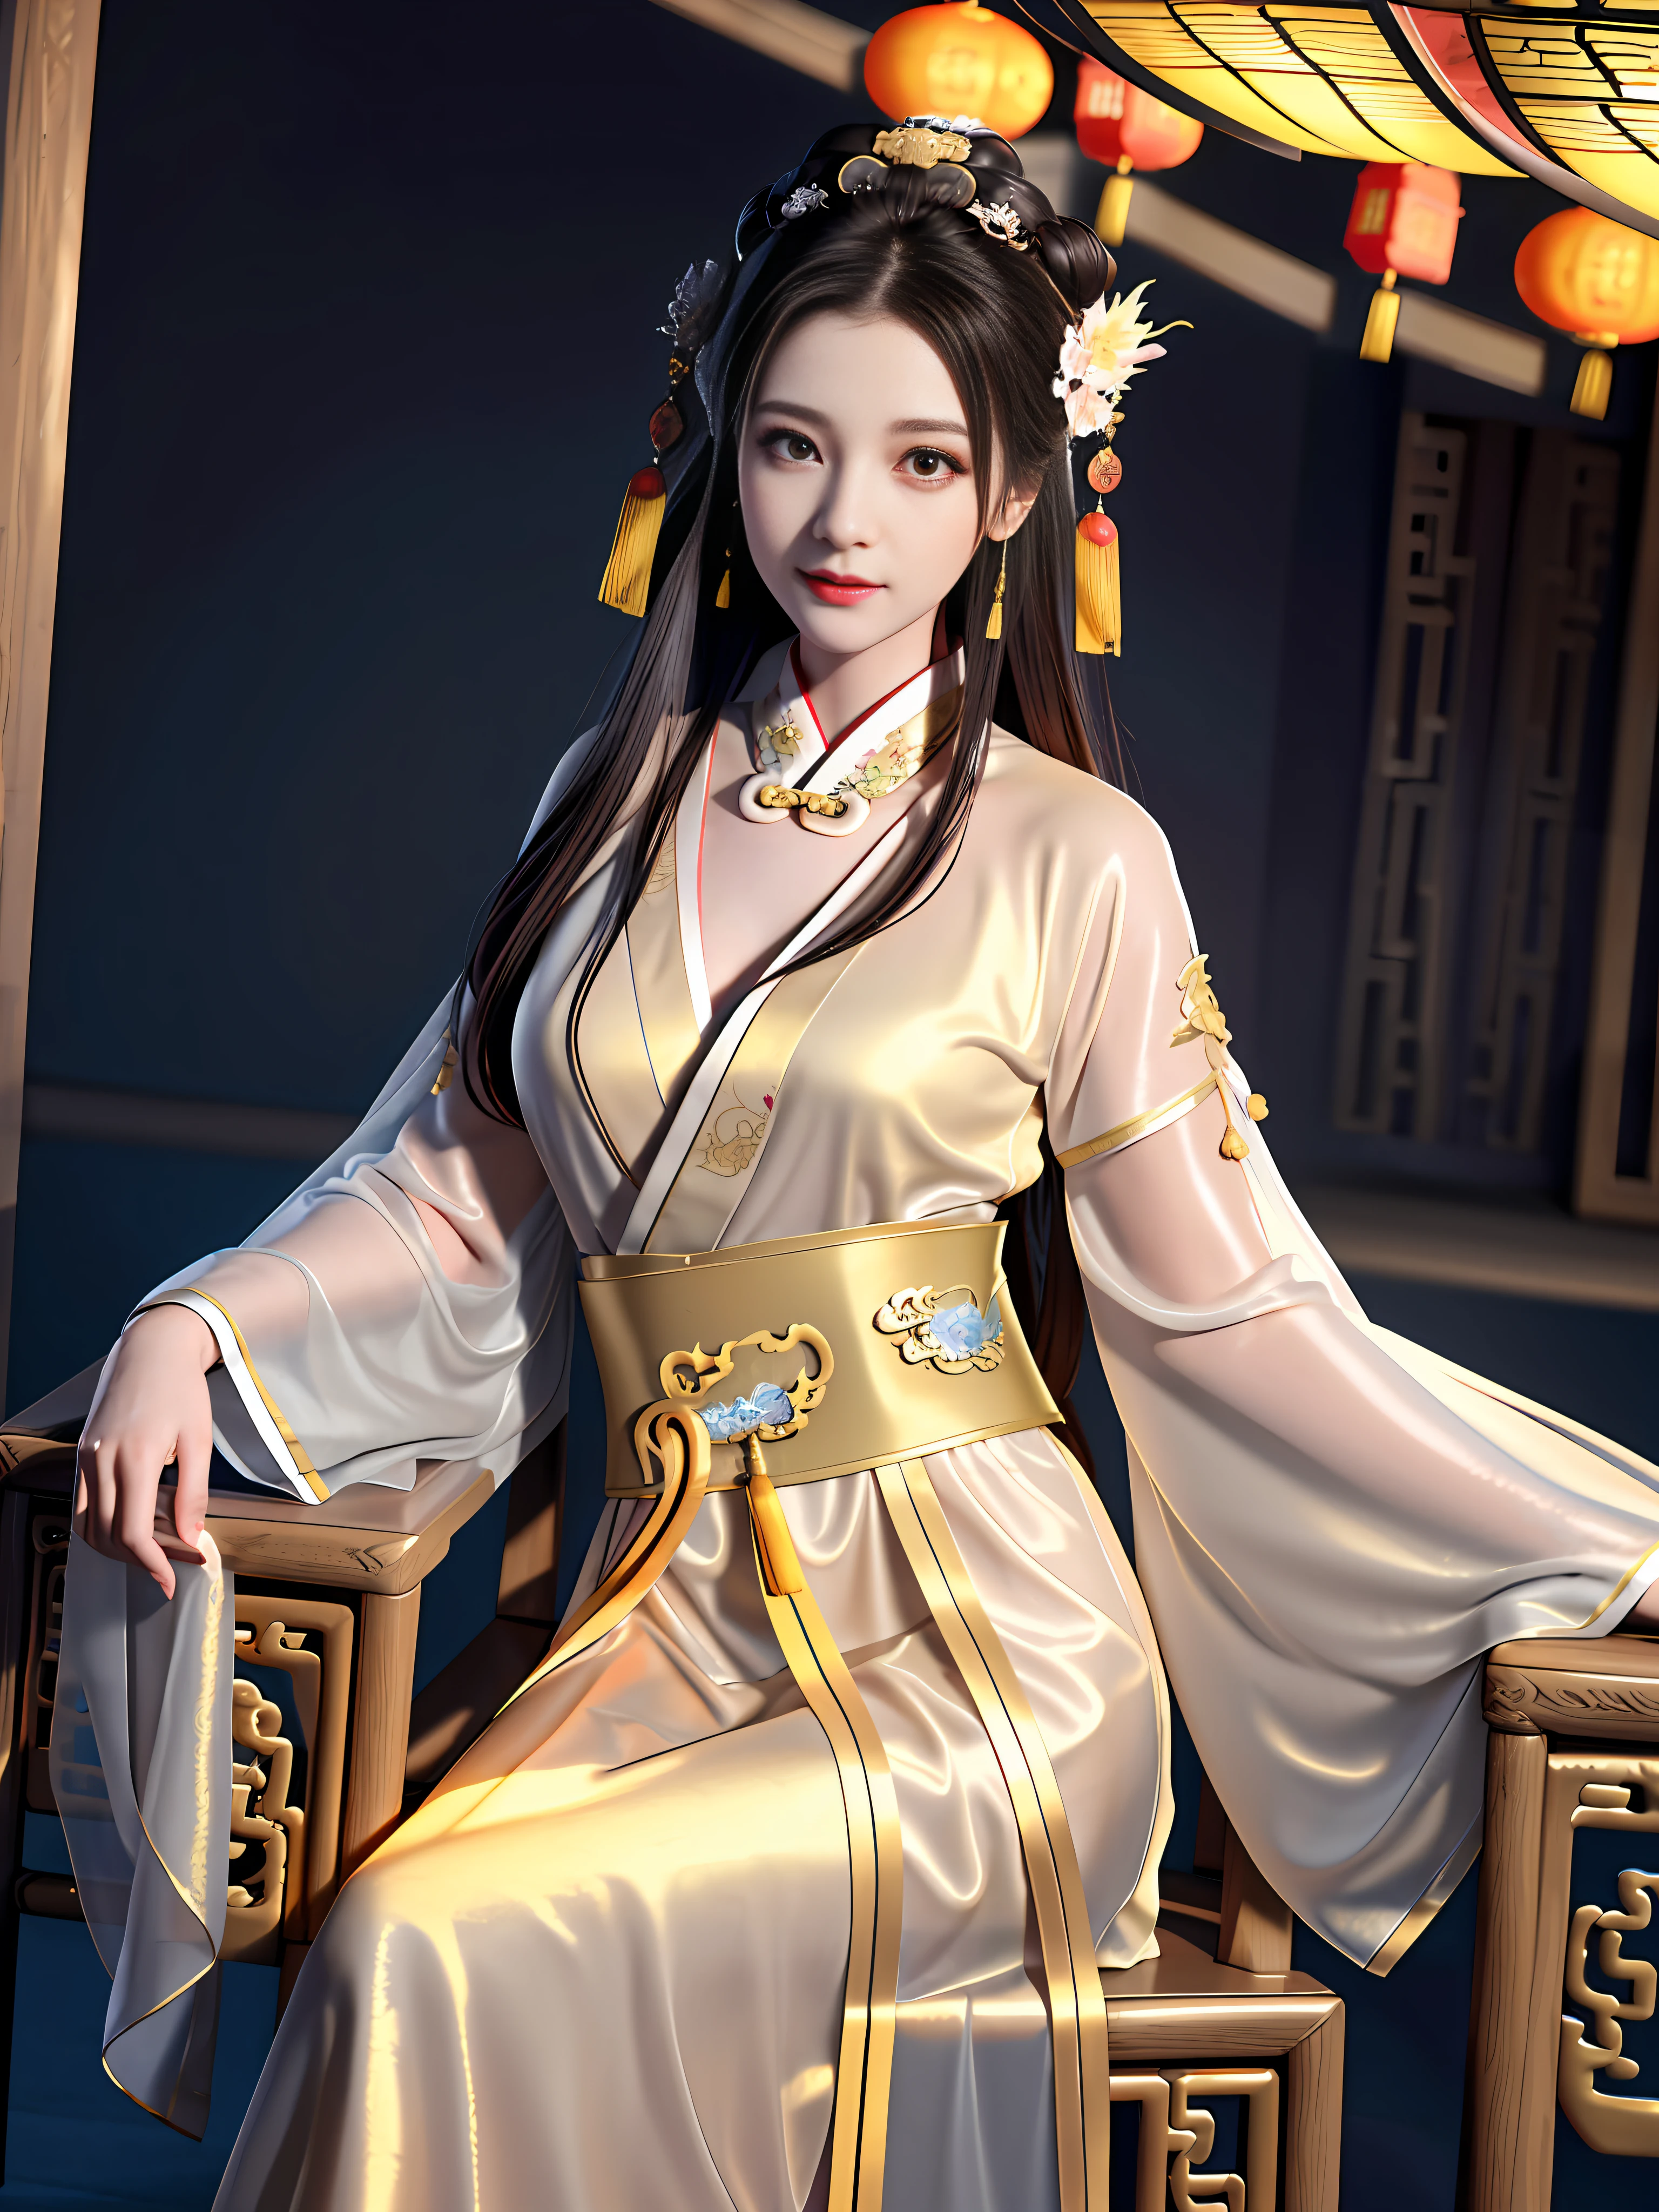 Best quality,masterpiece,high resolution,1 girl,(hanfu:1.2),(gold thread stitching:1.1),White translucent silk dragon robe,(Translucent Silk Dragon Robe:1.3),(Inside the ancient Chinese palace:1.2),(smile:1.1),lips,dress,(hair accessories:1.2),(Ancient Chinese dragon chair:1.3),necklace,(jewelry:1.1),long hair,Medium chest,earrings,delicate beautiful eyes,delicate eyelashes,beautiful face,upon_body,tyndall effect,(realistic:1.2),edge lighting,two-tone lighting,(high detail skin:1.2),8K UHD,DSLR camera,soft light,high quality,volumetric light,snapshot,(photo:1.1),high resolution,supreme,high resolution,detailed eyelashes,beautiful face,body,tyndall effect,two-tone lighting,(high detail skin:1.2),8k ultra high definition,soft light,high quality,volumetric lighting,candid shooting,(low angle shot:1.1),